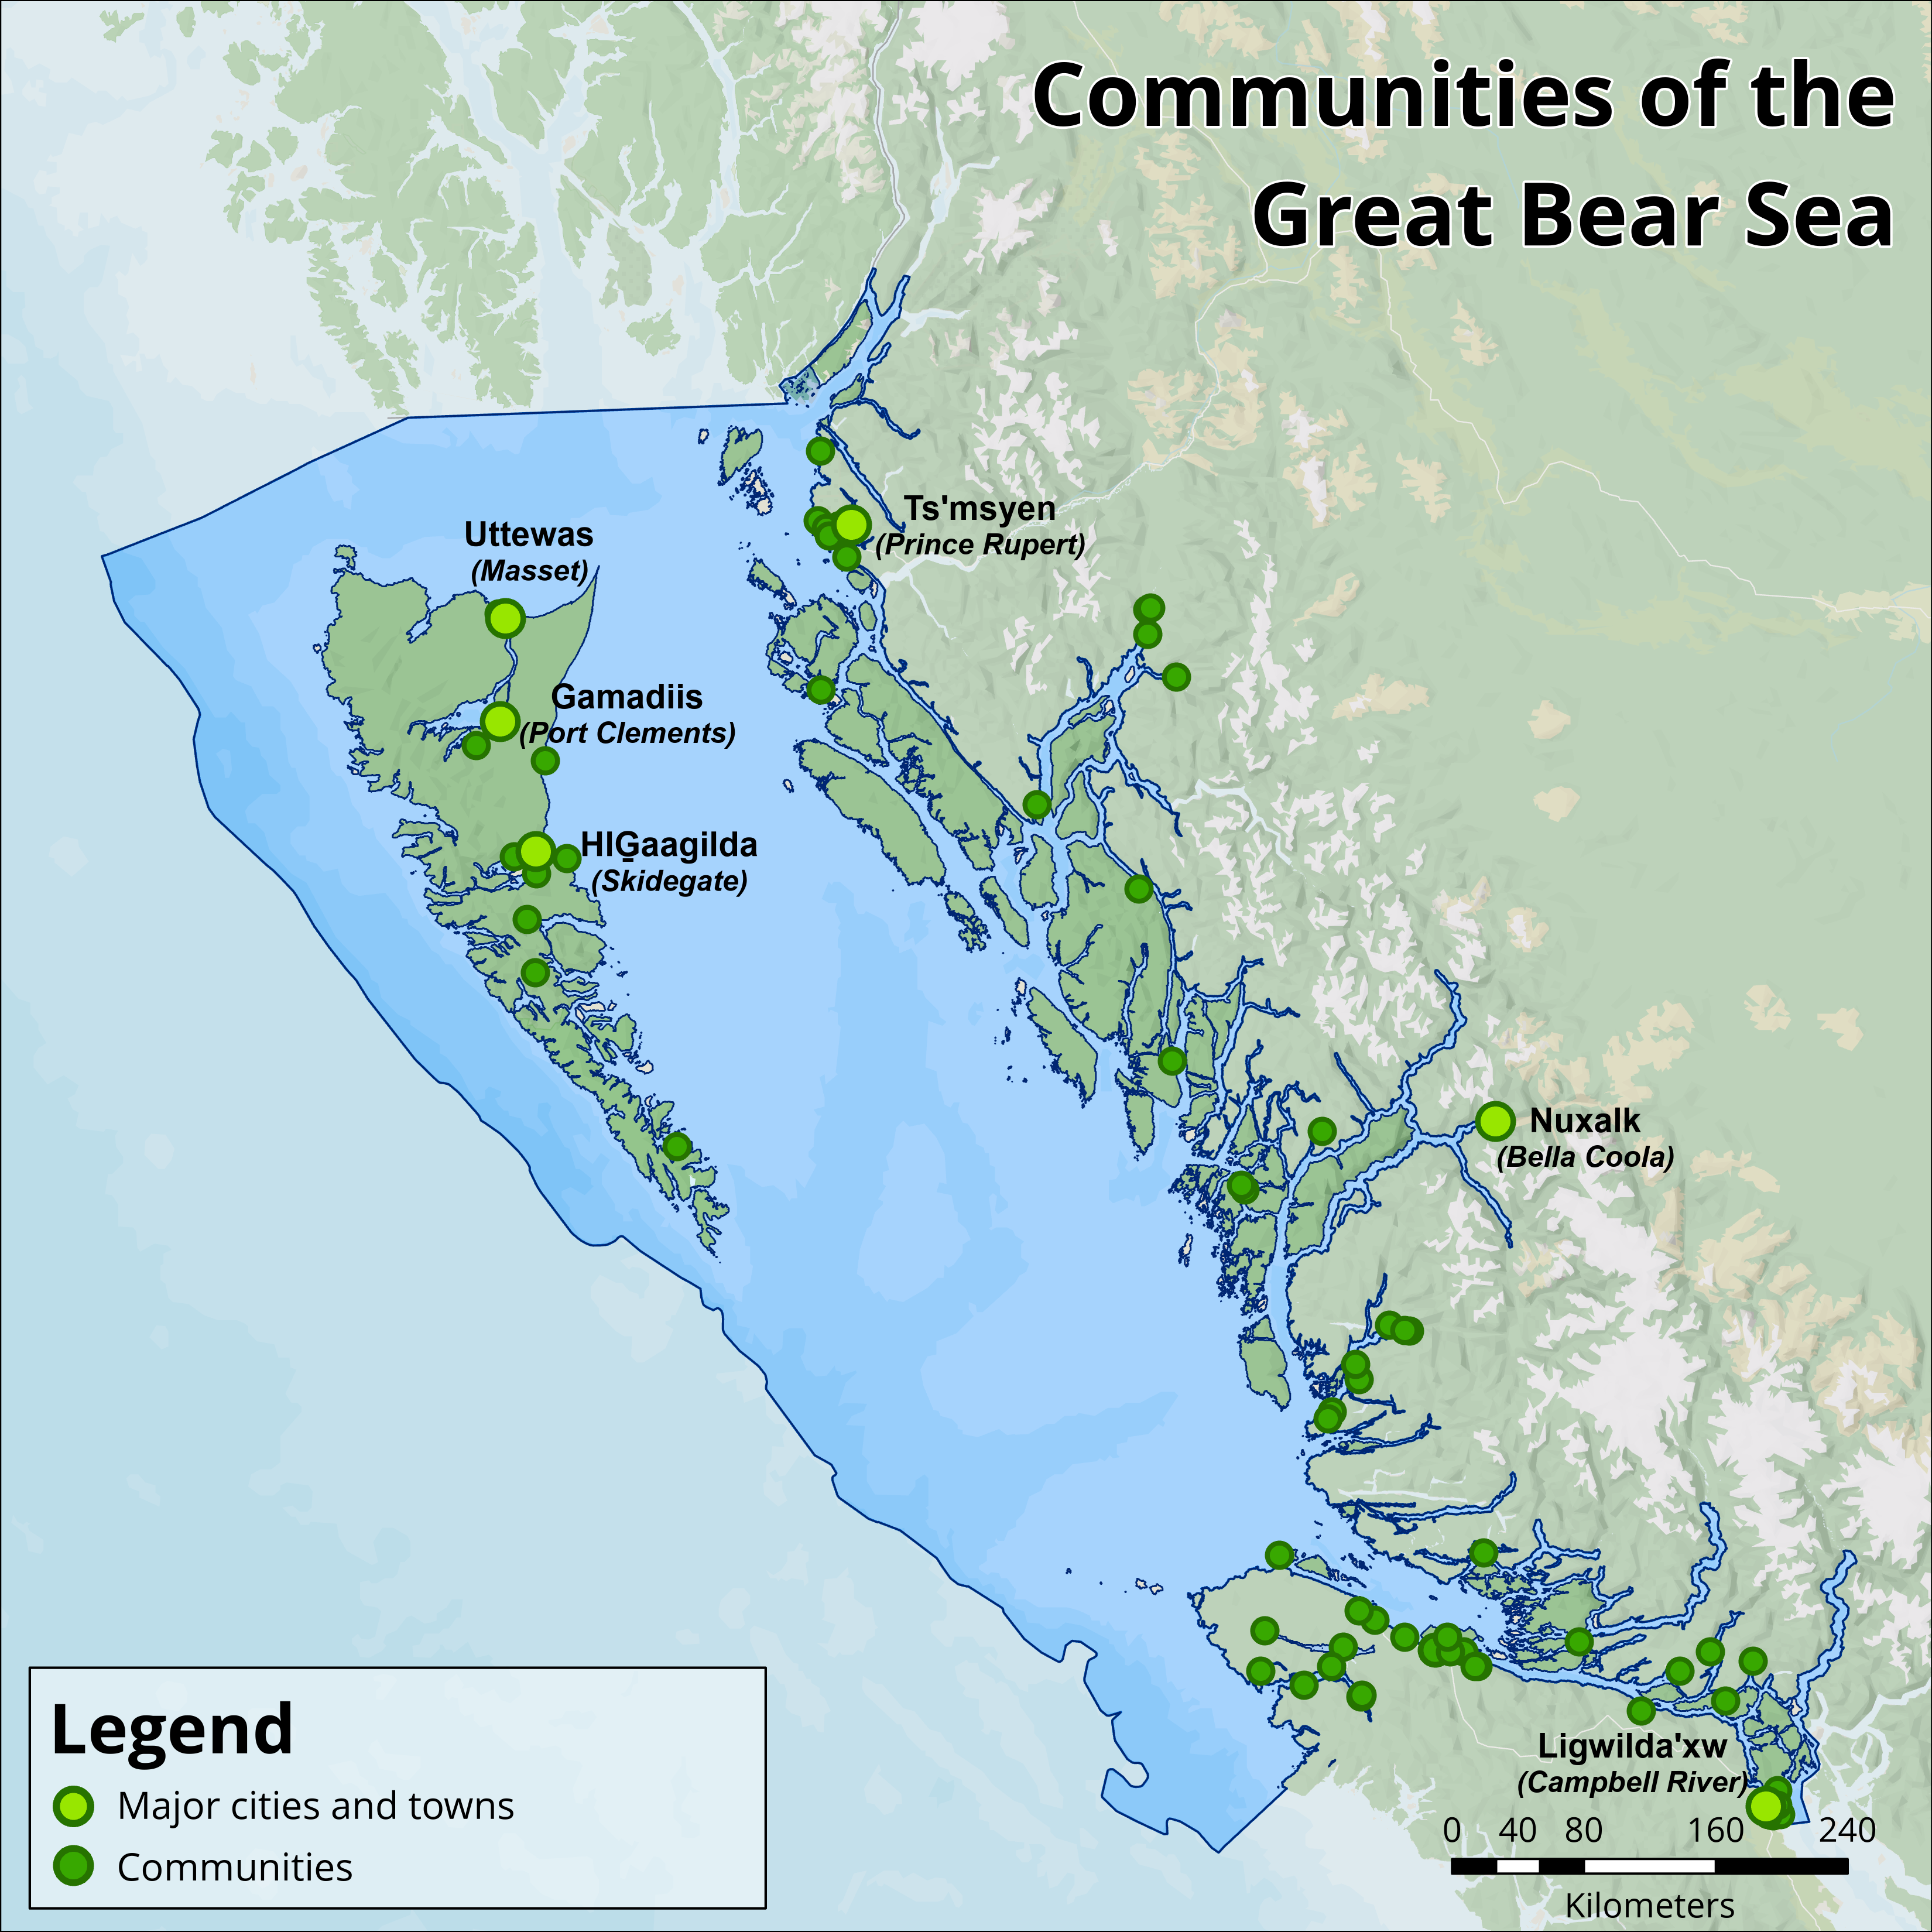 Showing the many many many communities along the shores of the Great Bear Sea.